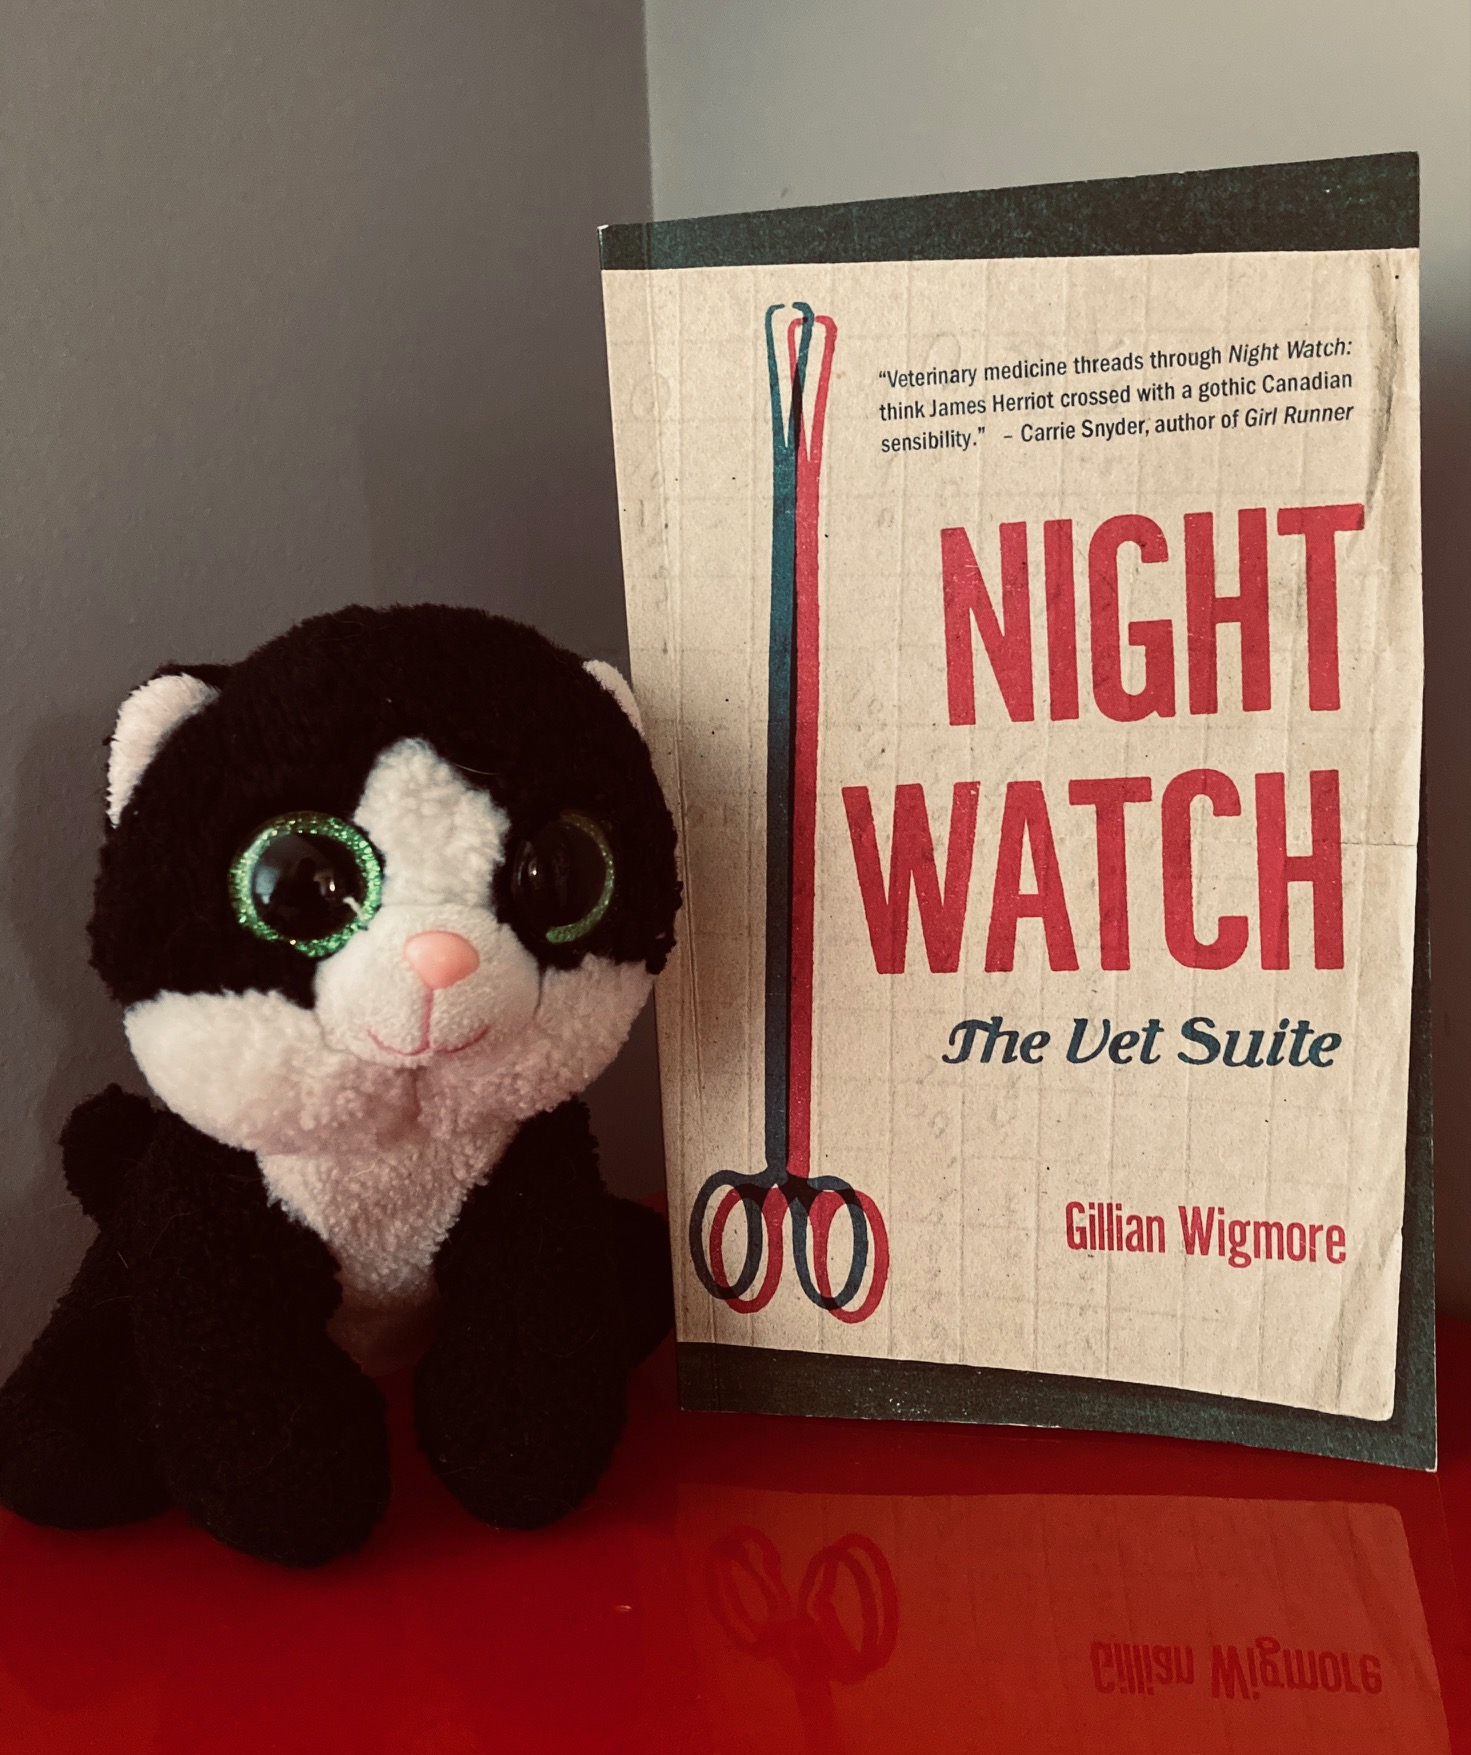 Night Watch, The Vet Suite by Gillian Wigmore book